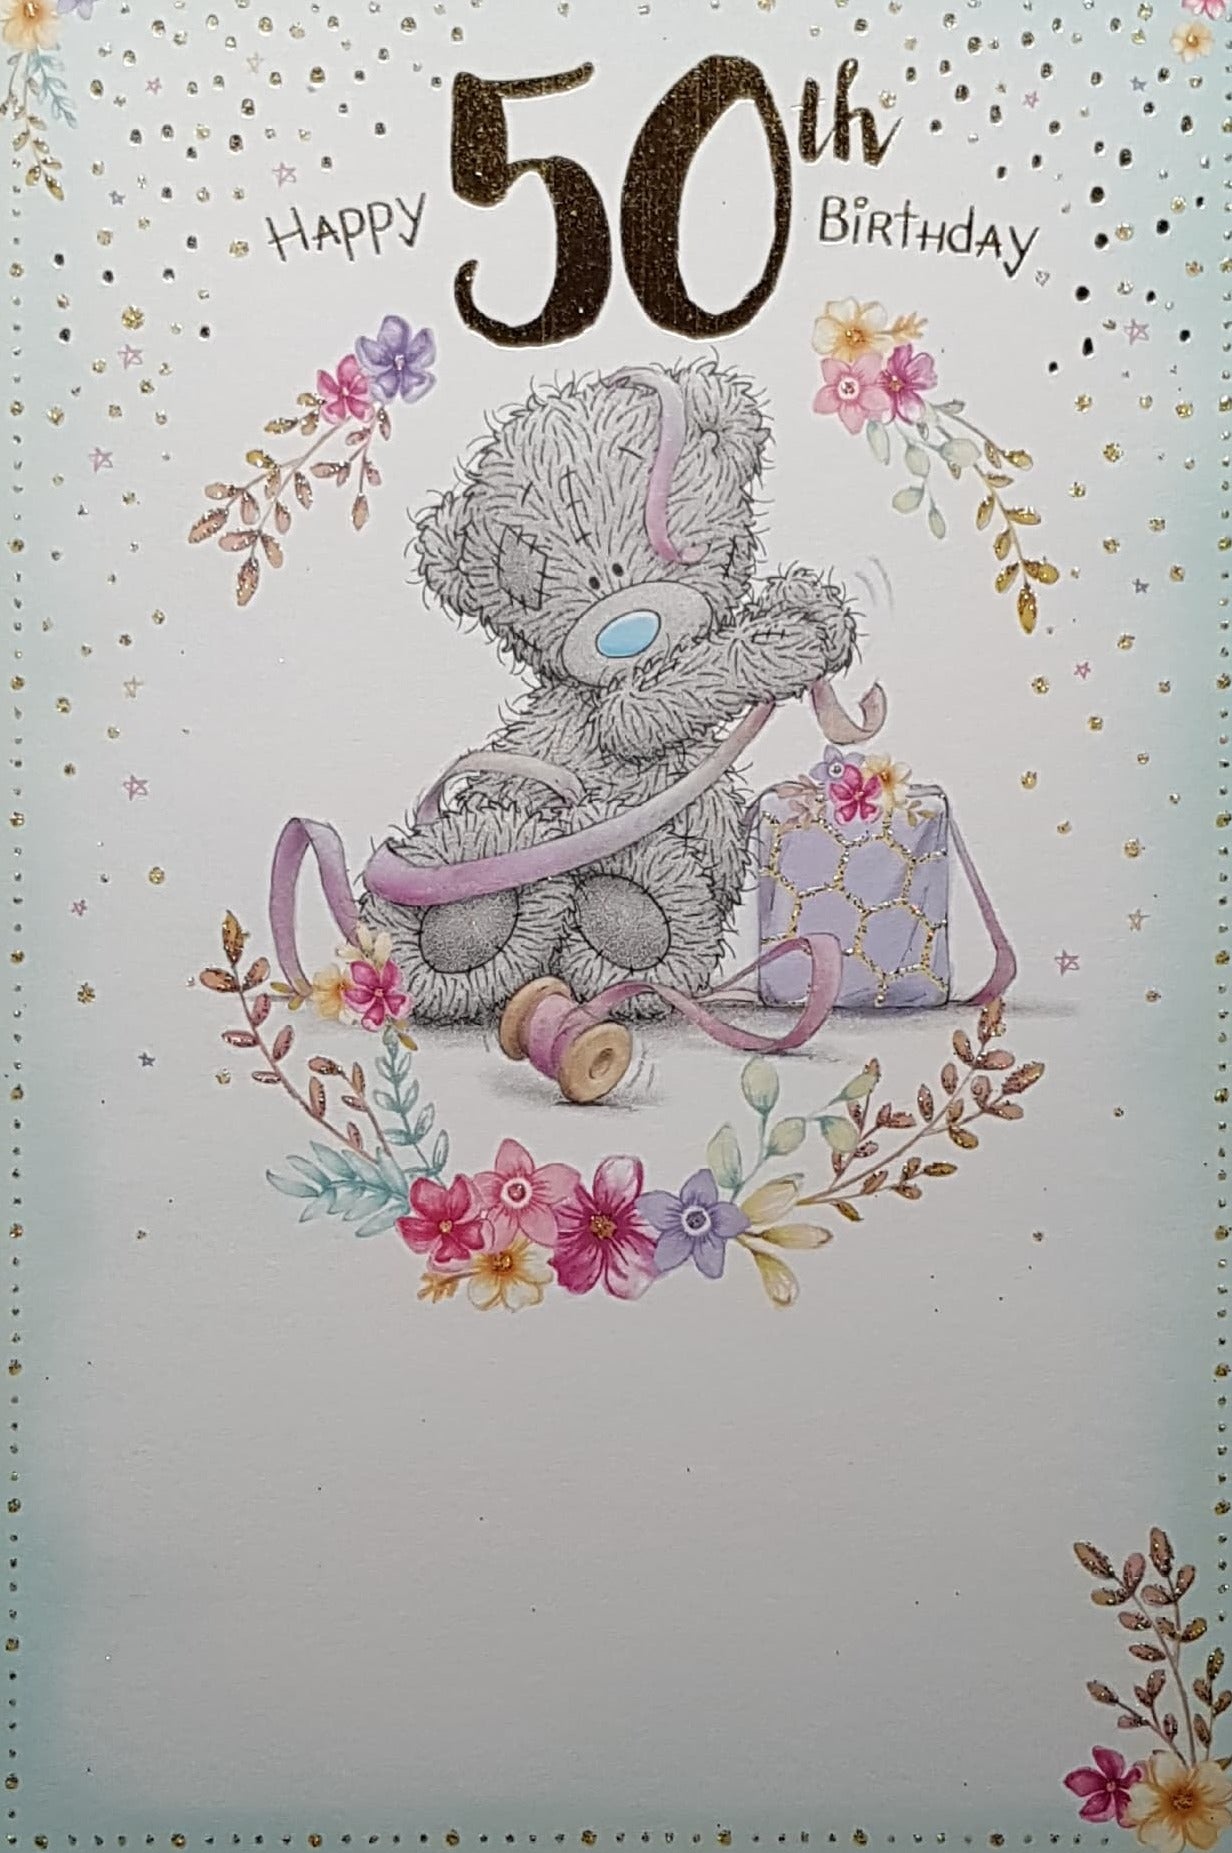 Age 50 Birthday Card - Cute Teddy Opening A Gift Tangled In A Pink Ribbon